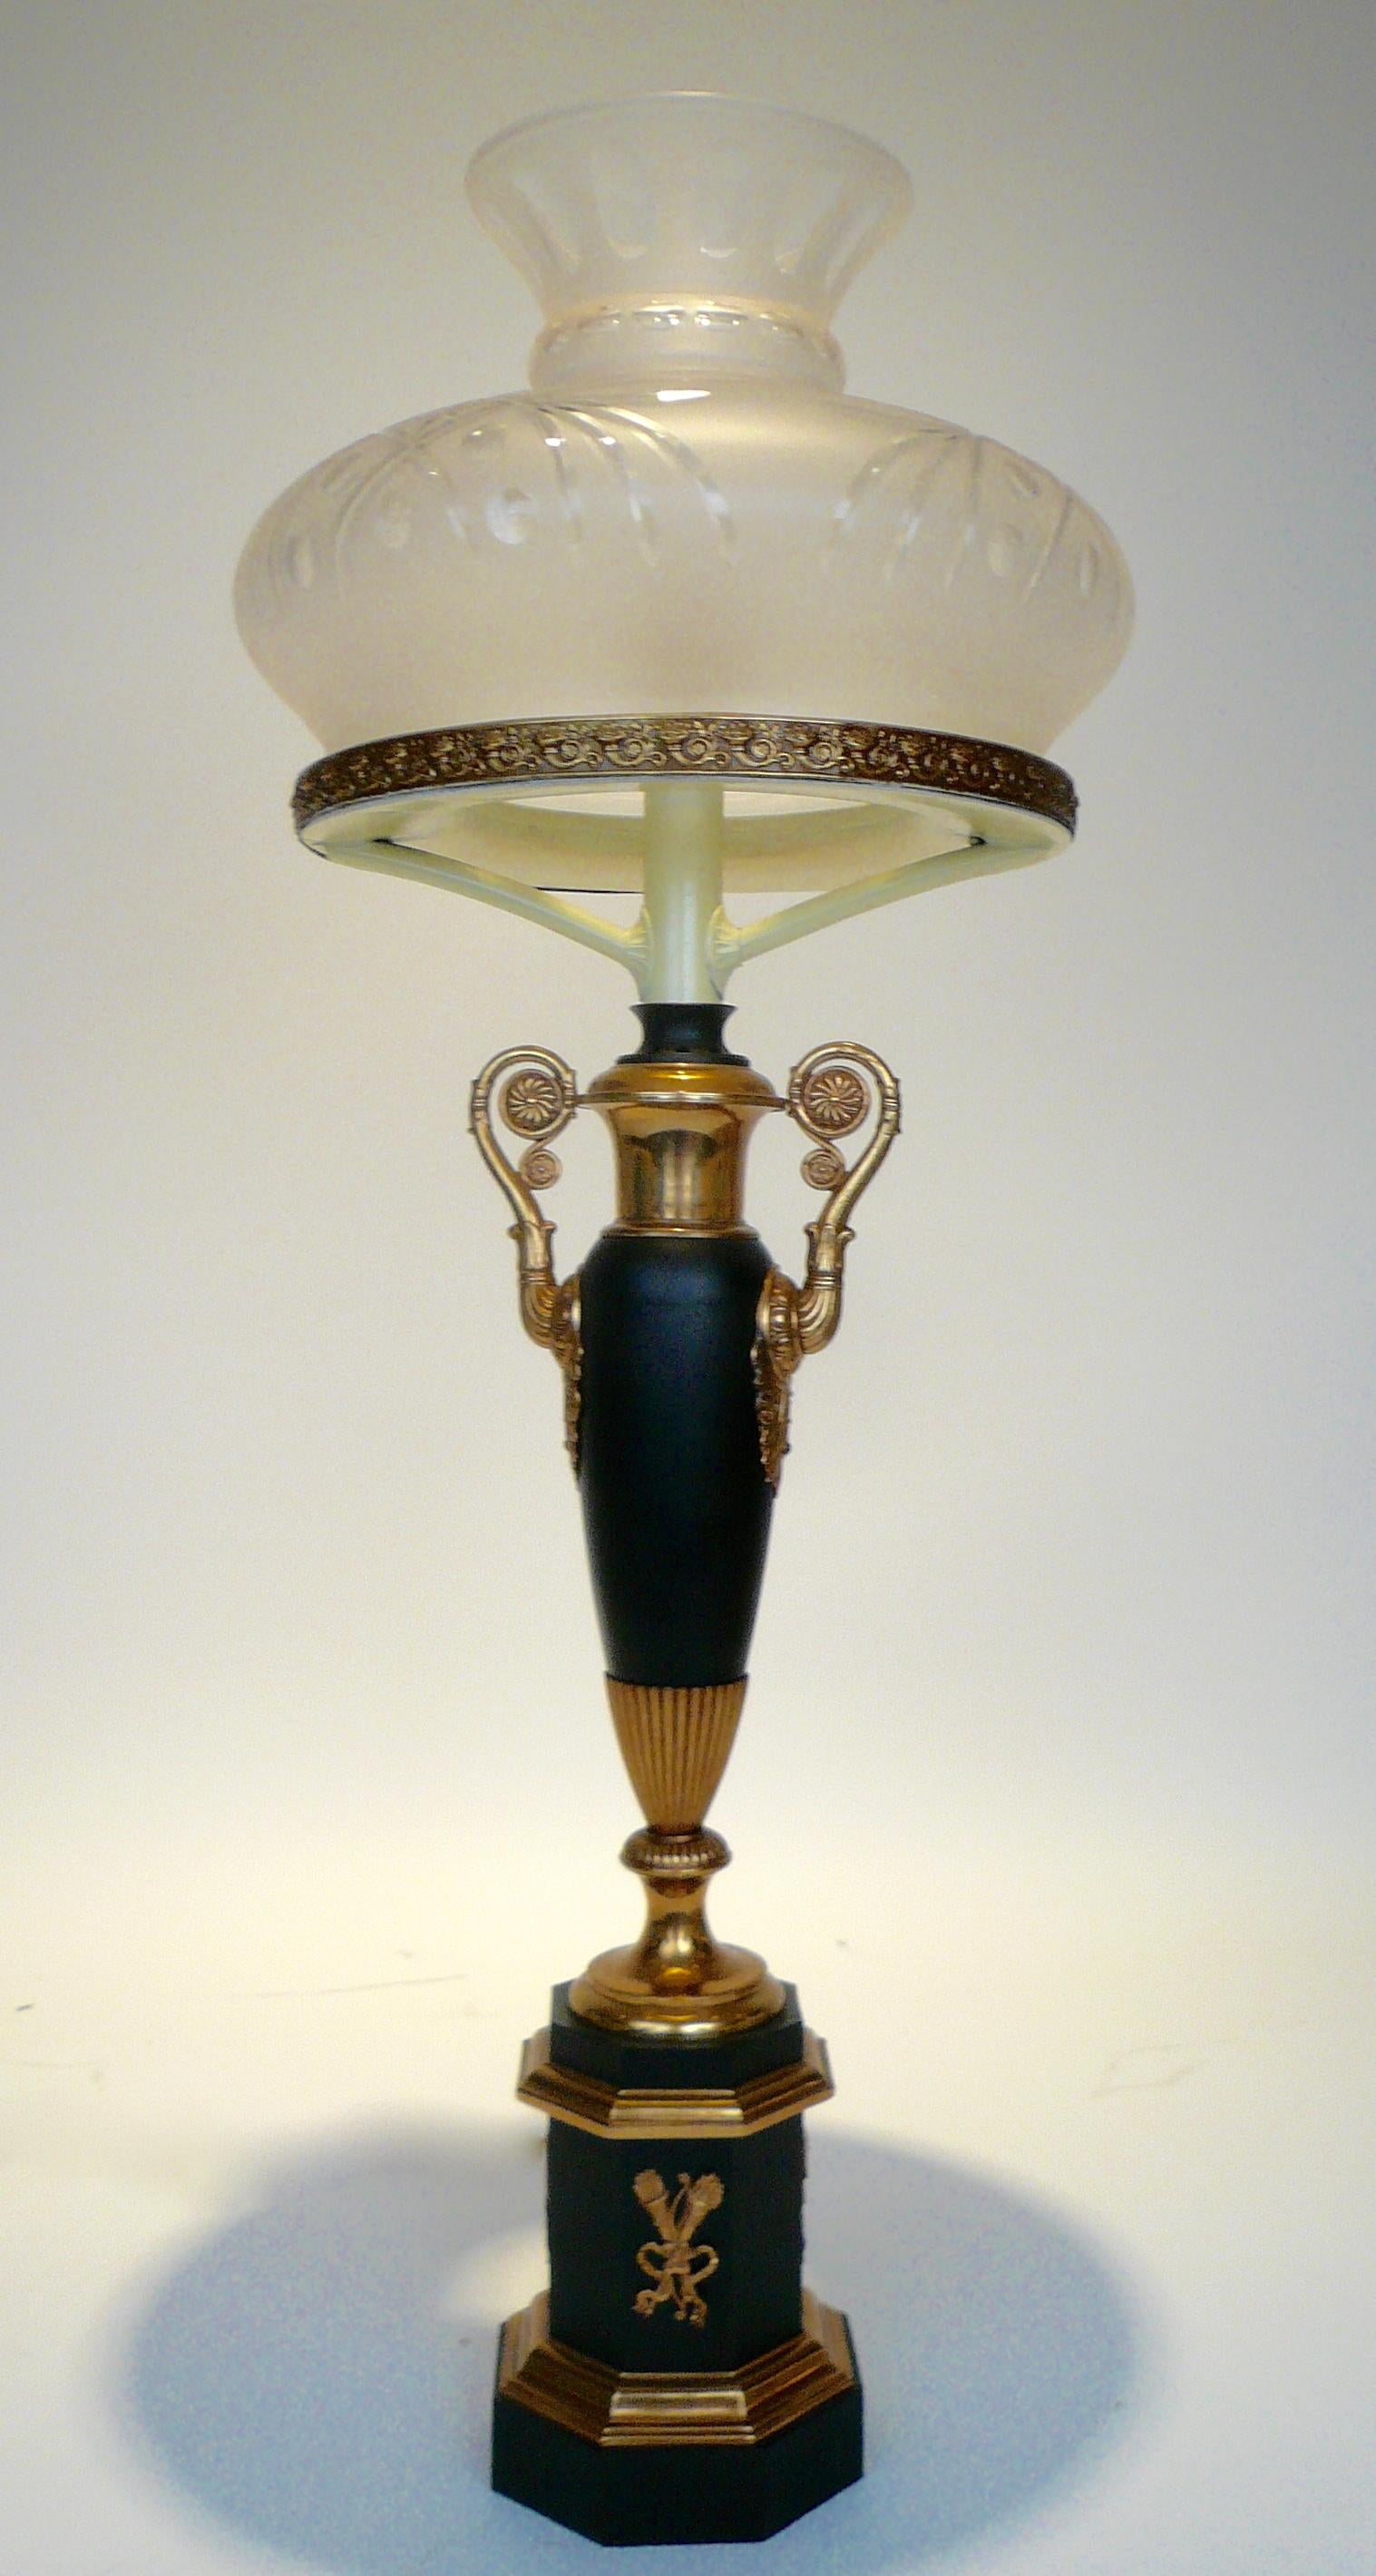 This handsome urn form sinumbra lamp retains it's original oil reservoir. It features neoclassical motifs including cornucopia, acanthus leaves and floral rosettes.
 